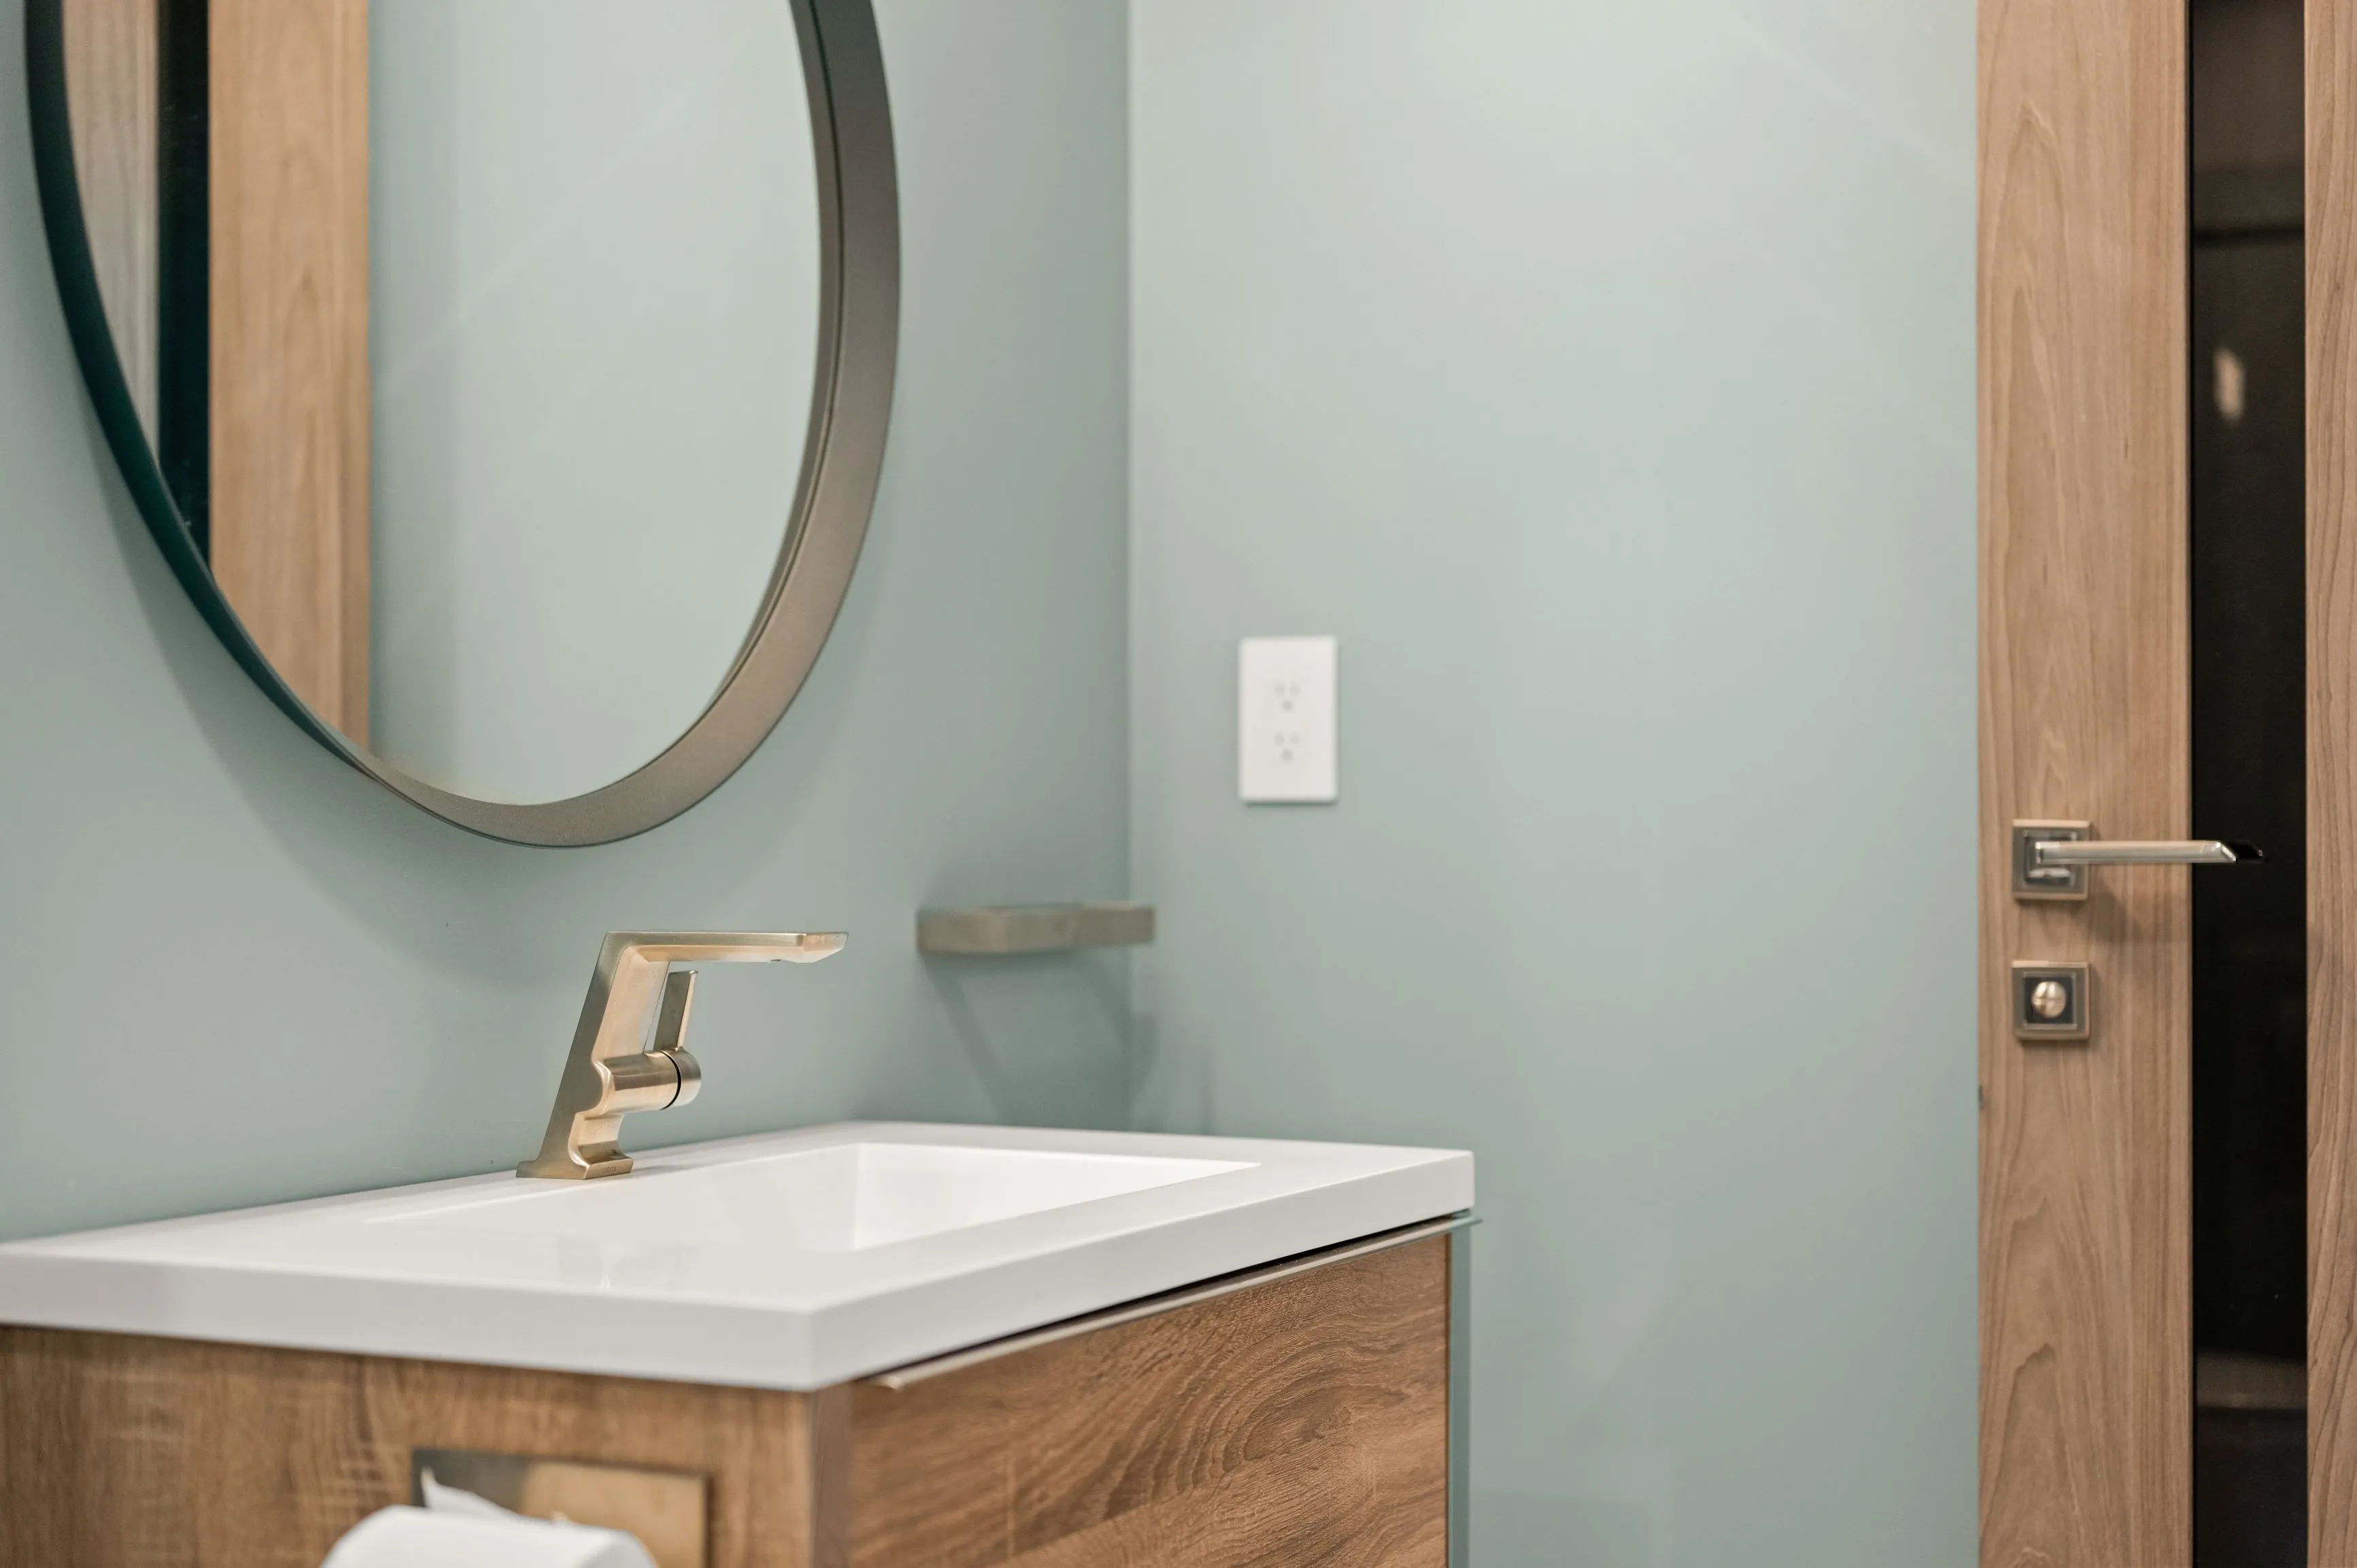 Modern bathroom with a square sink, bronze faucet, round mirror, wooden cabinet, and teal walls.